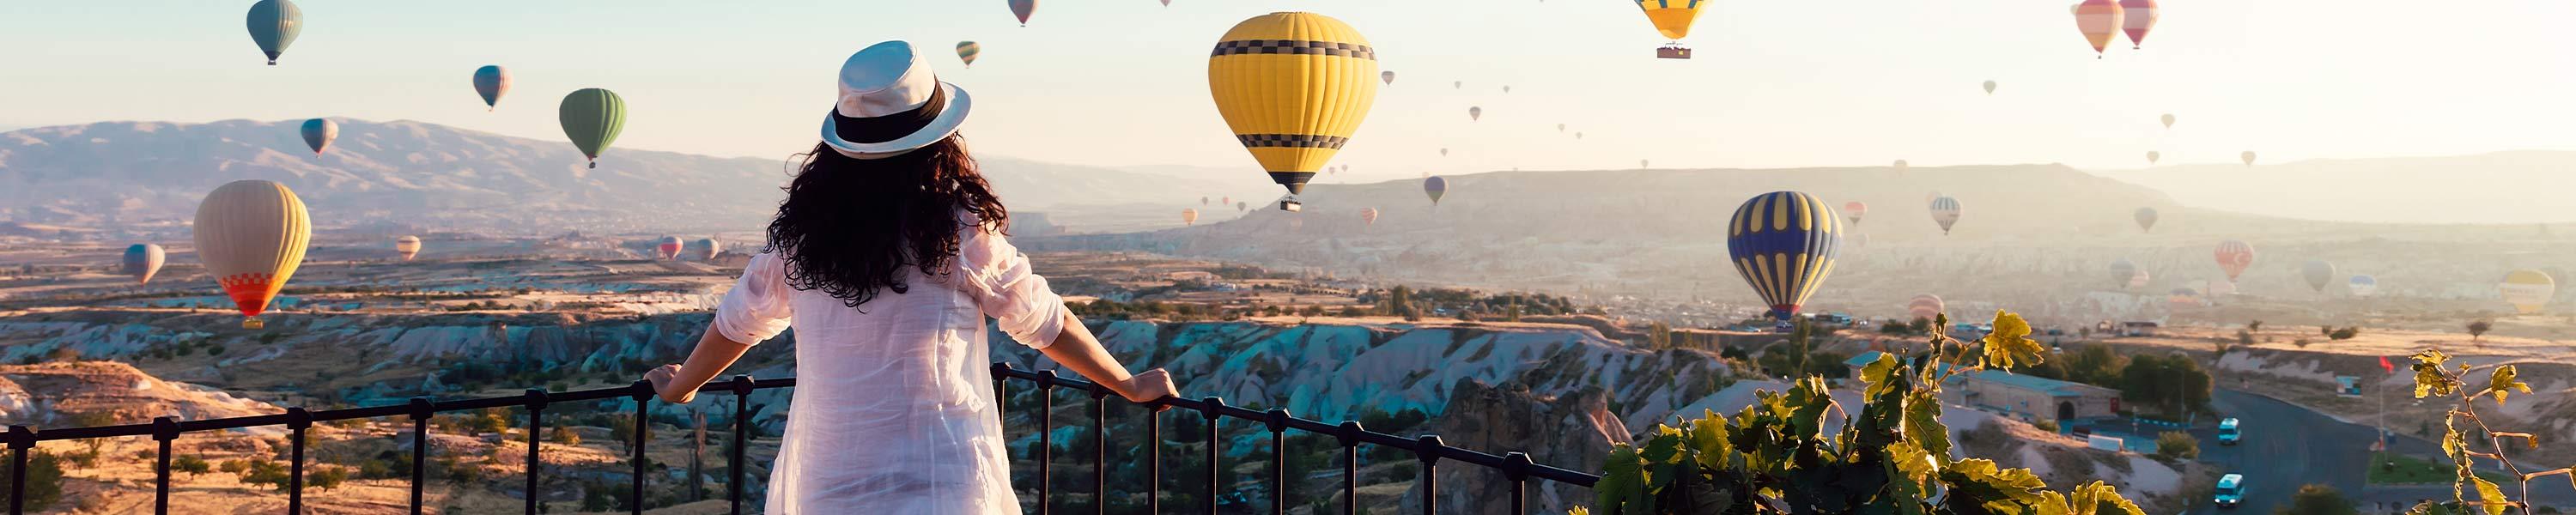 Tourist looking out to hot air balloons